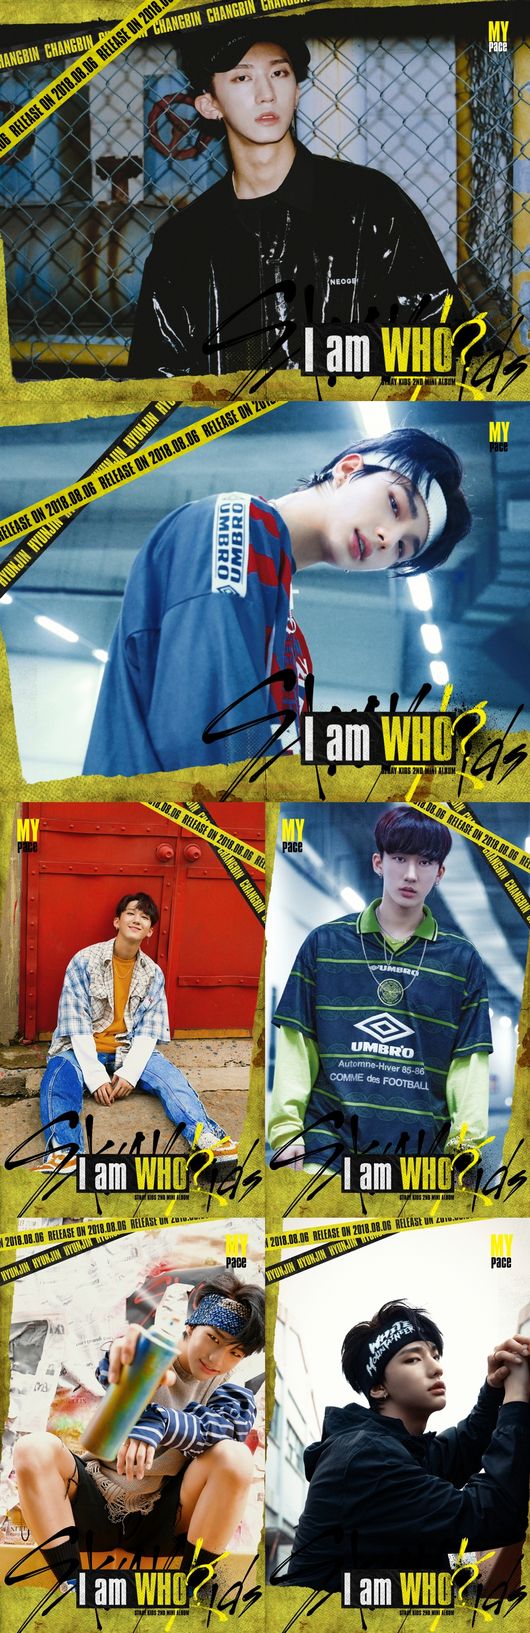 Stray Kids Changbin and Hyunjin released a personal teaser for their new song My Babyface (MY PACE), which shows a distinctive personality.JYP Entertainment (hereinafter referred to as JYP) presented six personal Teaser images of Changbin and Hyunjin, which contain the concept of My Babyface on various SNS channels of JYP and Stray Kids at 0:00 on the 27th.Changbin and Hyunjin, the second protagonists after Woojin and Reno, the first runners of the comeback personal Teaser released at 0:00 on the 26th, gave fans the pleasure of seeing their personalities and characters with visuals.In the teaser image, which was released in three pages, Changbin showed a charm like a naughty smile with an innocent smile, and appealed to the charm of reversal by emitting chic with all black look.Hyunjin caught his eye by digesting a hair band that showed a free and active feeling, and showed a sharp charm with a picturesque side.Stray Kids is raising the comeback fever by releasing track lists, unit teaser images and individual Teaser images sequentially, which make the song atmosphere look forward to the release of their second mini album, I am WHO and the title song My Babyface on August 6.In particular, according to the track list of the new album IM Who released on the 23rd, Stray Kids participated in the lyrics and compositions of all 8 tracks including the title song My Babyface.The comeback title song My Babyface was a member of the team who wrote and composed his debut song District 9 and produced the production team 3RACHA, Changbin, Han wrote and composed.Compared to others, you may get nervousness or anxiety, but each person has their own Babyface and you can go to that Babyface.Trust yourself, he said, with a powerful message.Stray Kids is expected to dissolve their own Babyface and new energy into the new song My Babyface Performance.Meanwhile, Stray Kids is a new boy group selected through the reality program Stray Kids introduced by JYP and Mnet in October 2017.The Ray Kids, composed of nine members of Bang Chan, Woojin, Reno, Changbin, Hyunjin, Han, Felix, Seungmin, and Aien, were early noted as a team that combines musical skills and overwhelming performance before its official debut.JYP Entertainment